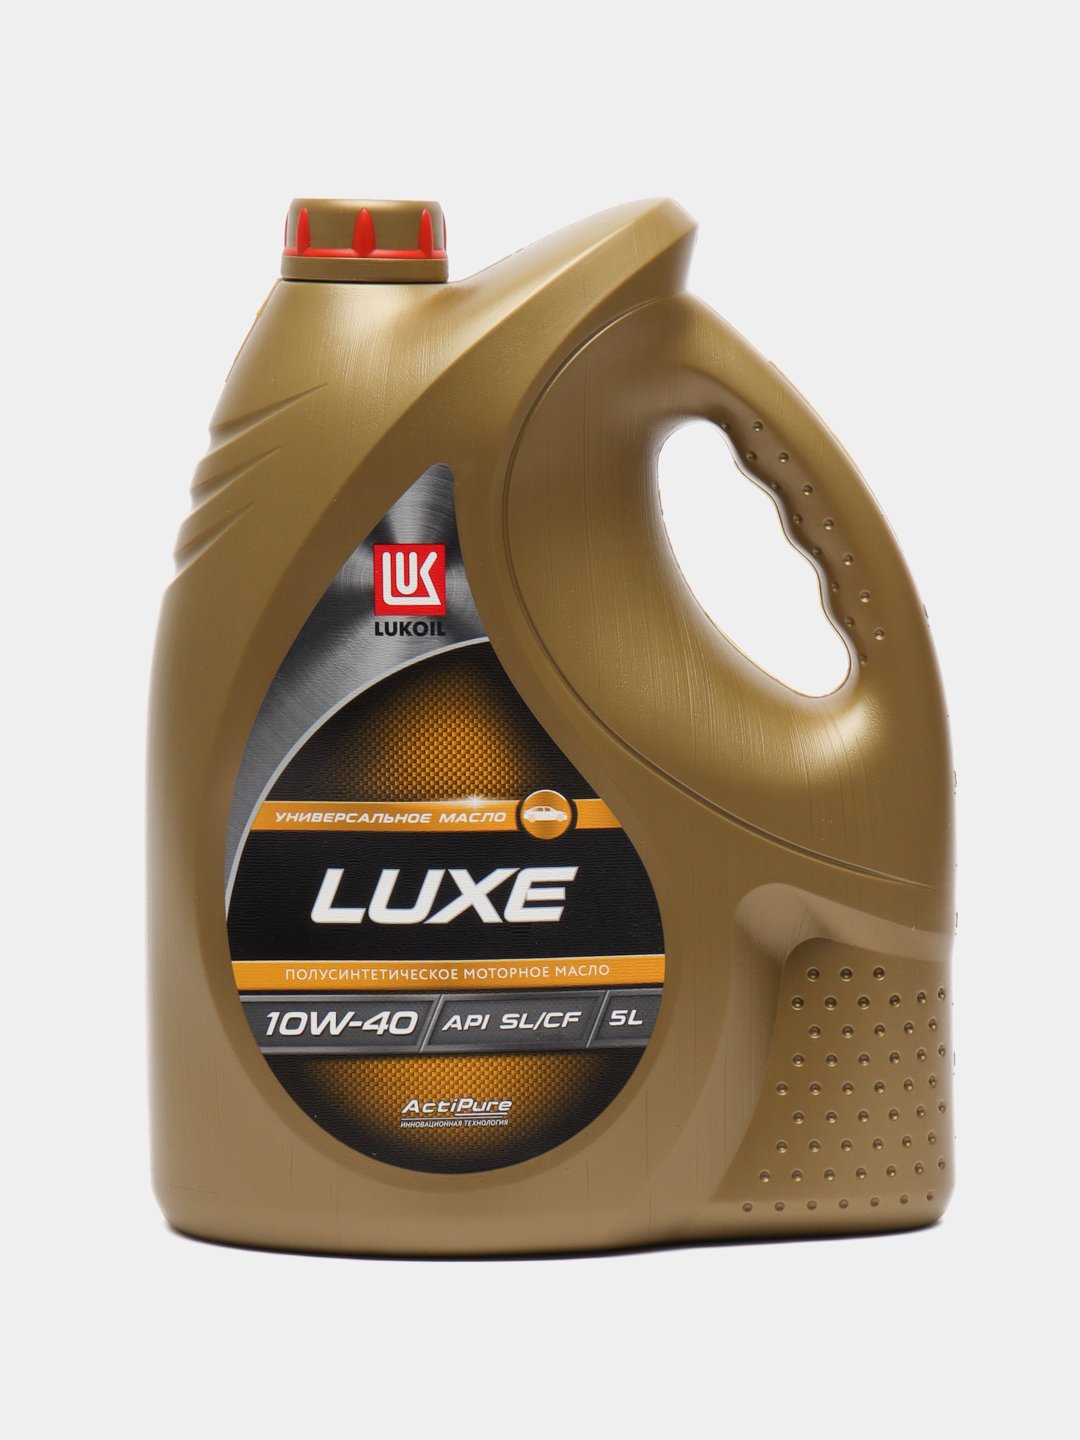 Масло лукойл люкс 10w40. Lukoil Luxe 10w-40. Лукойл Люкс 10 w40 ЫД са. Kerjqk k.RC 10w40 207k. Лукойл Люкс 10w40 207 литров бочка.